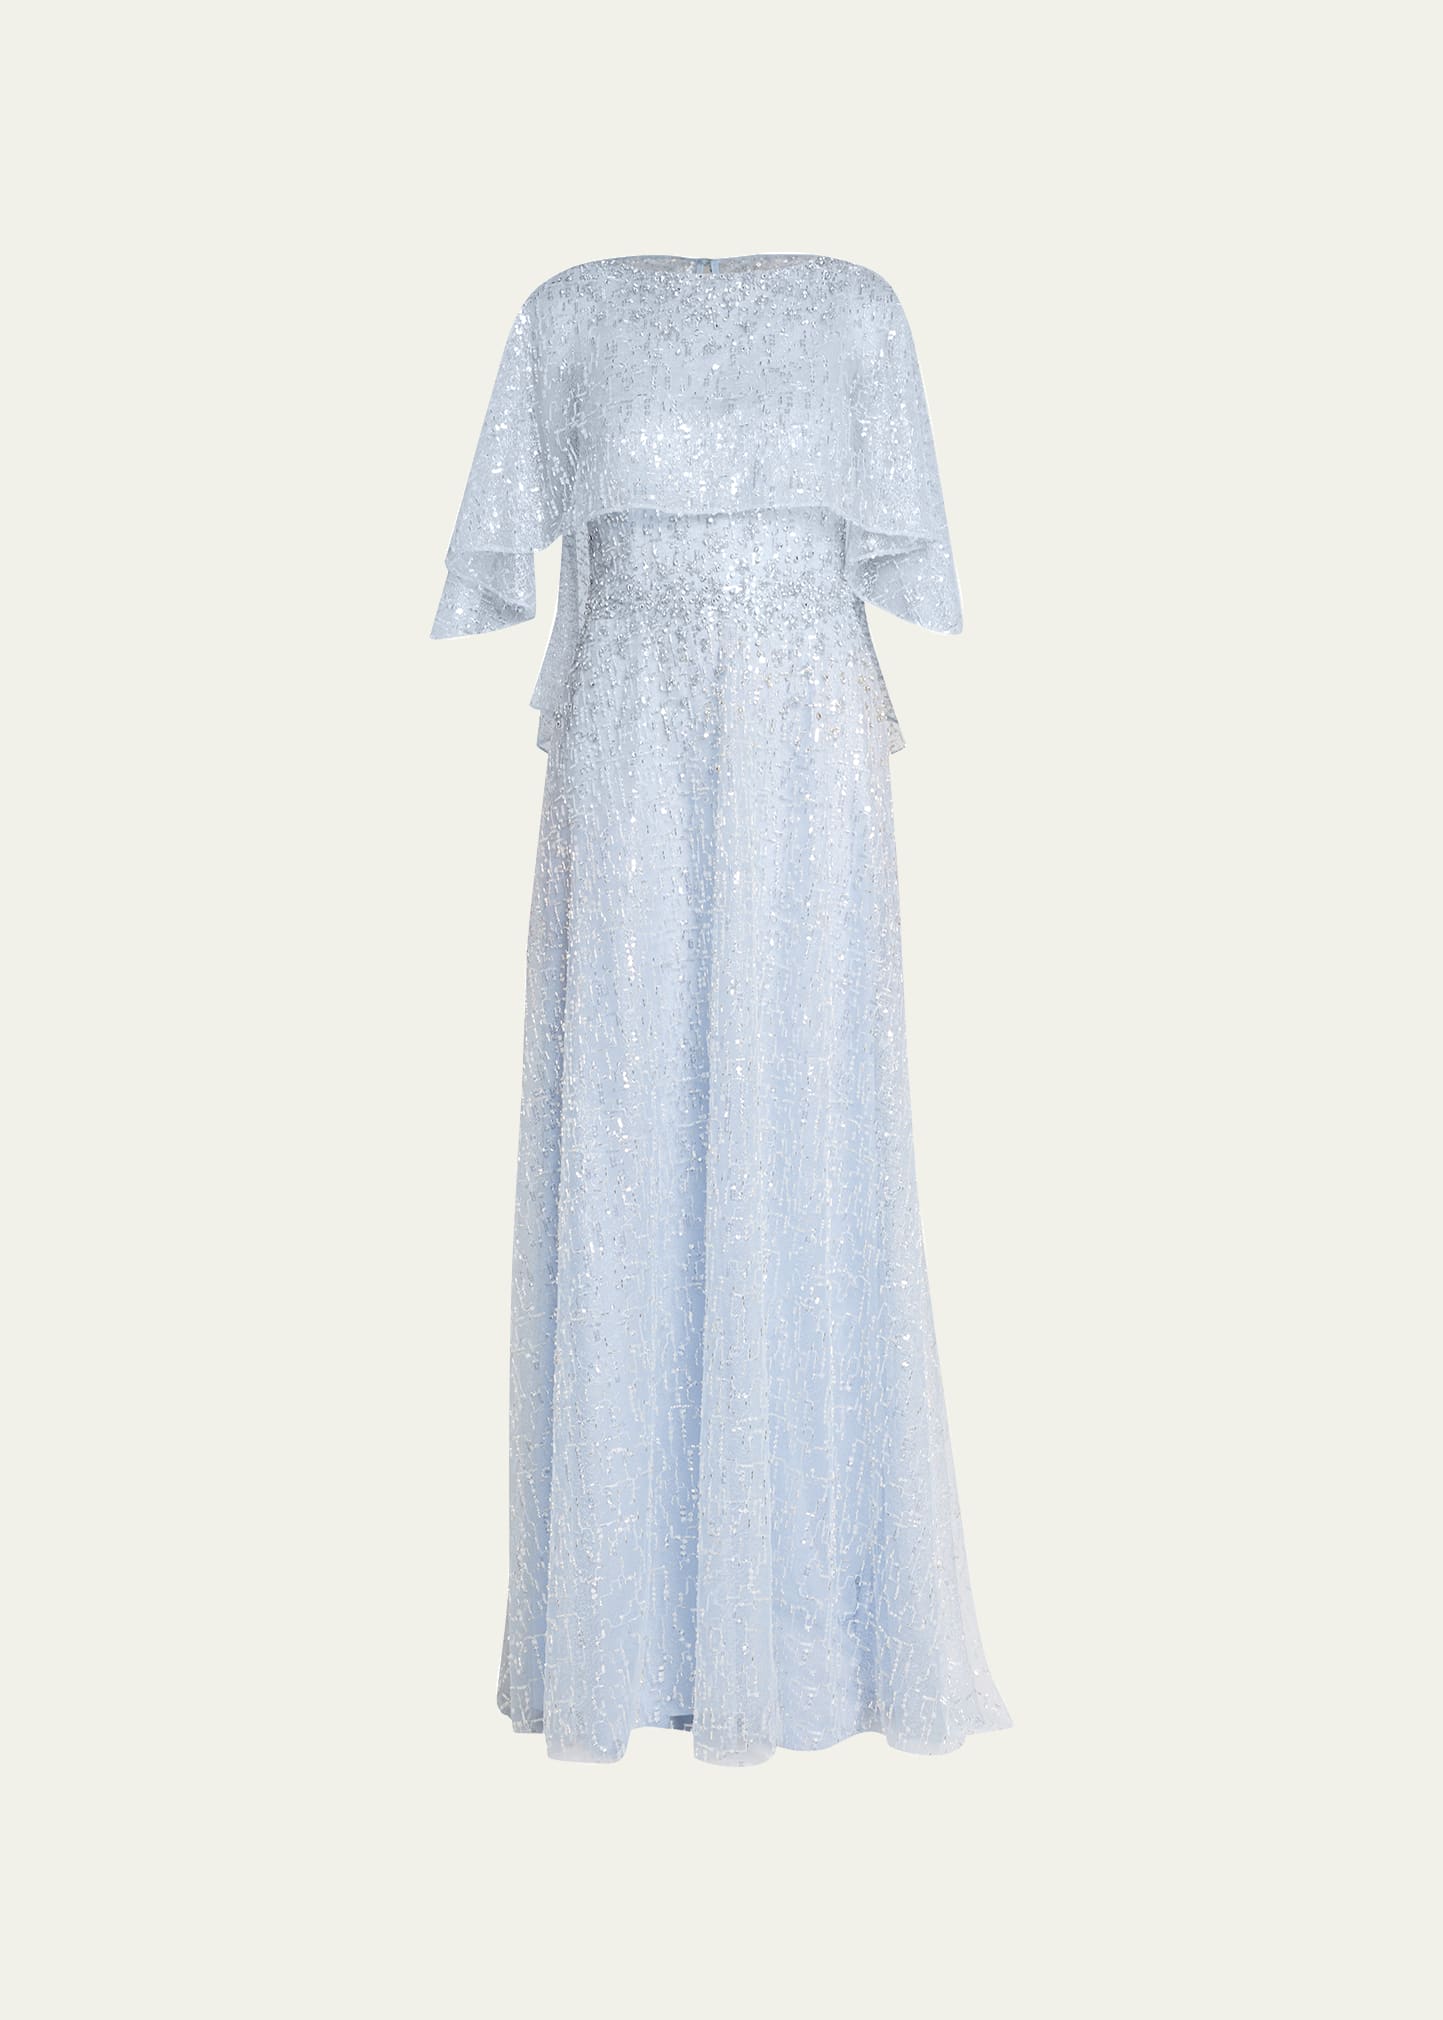 Rickie Freeman For Teri Jon Beaded Mesh Capelet A-line Gown In Ice Blue